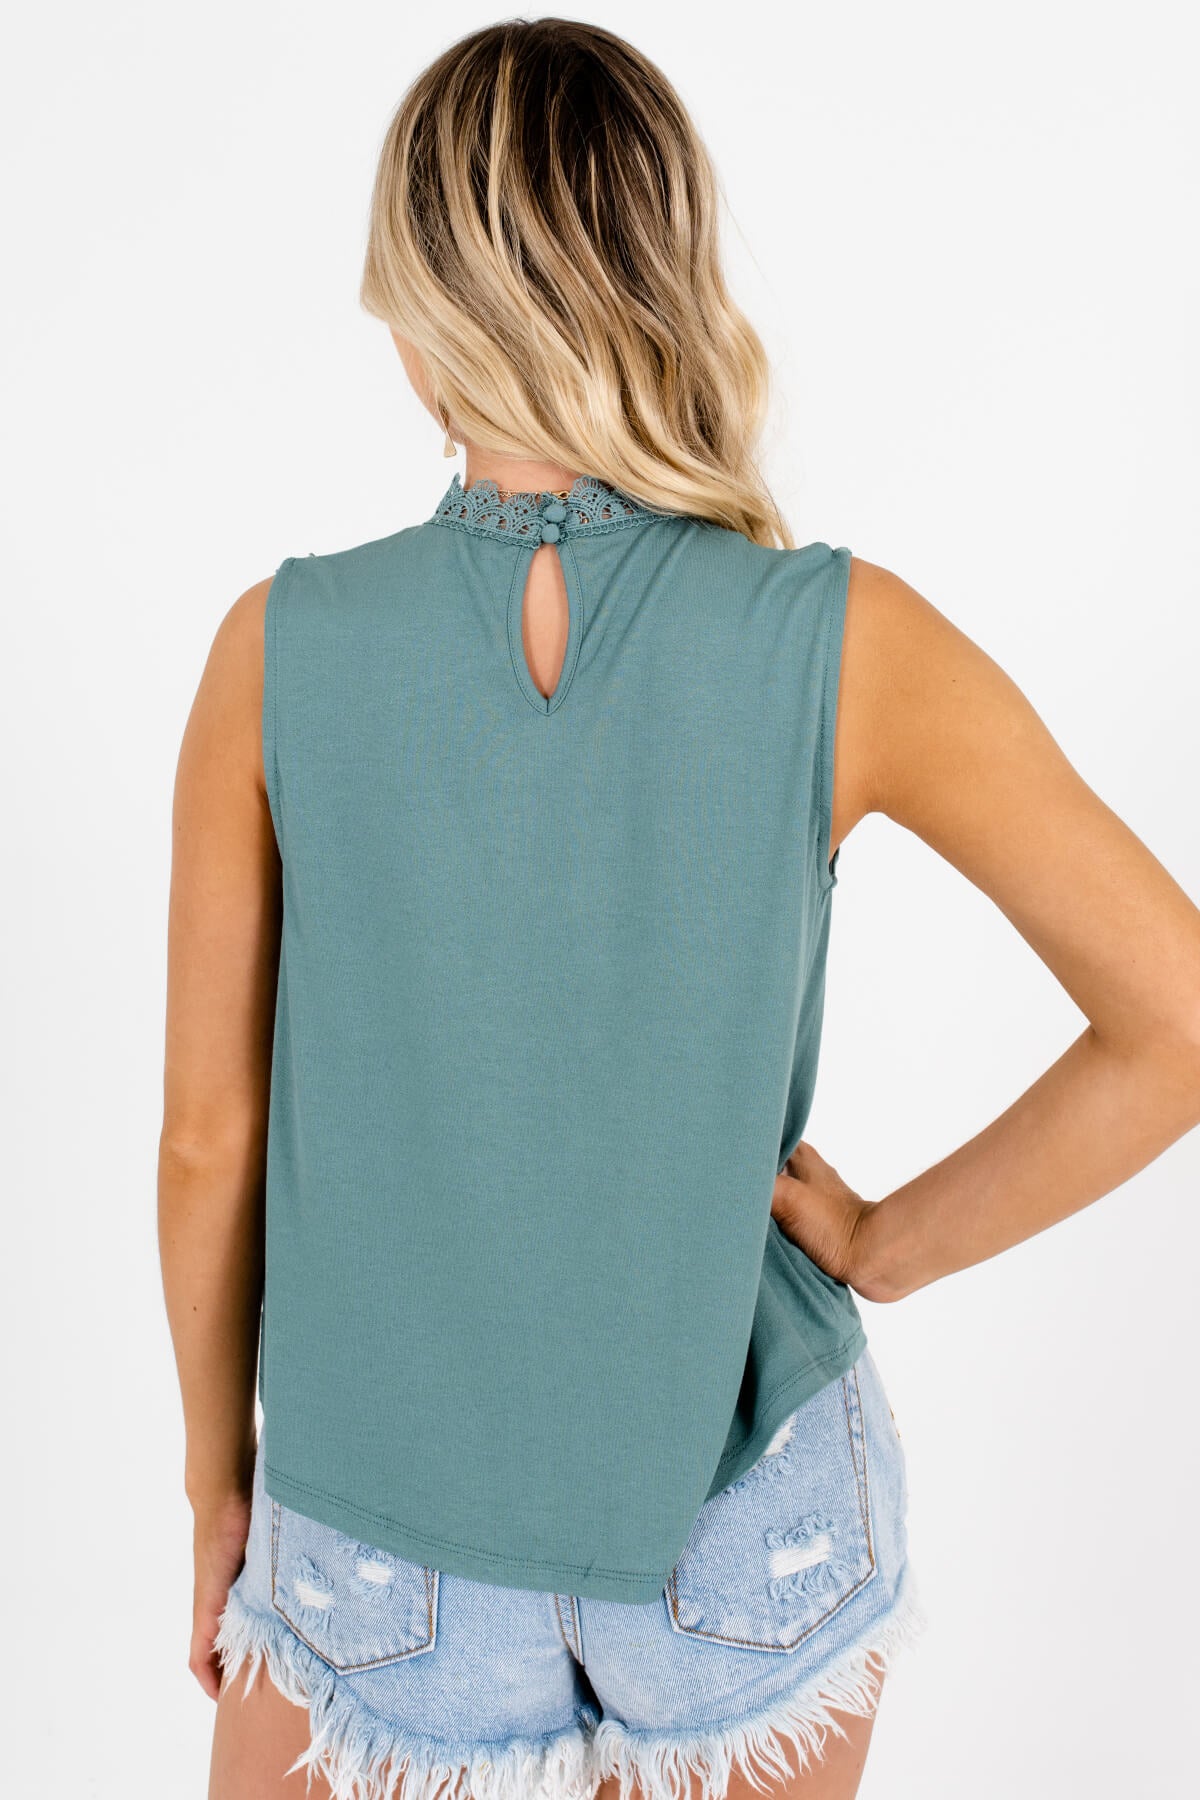 Teal Green Cutout Lace Tank Tops Affordable Online Boutique